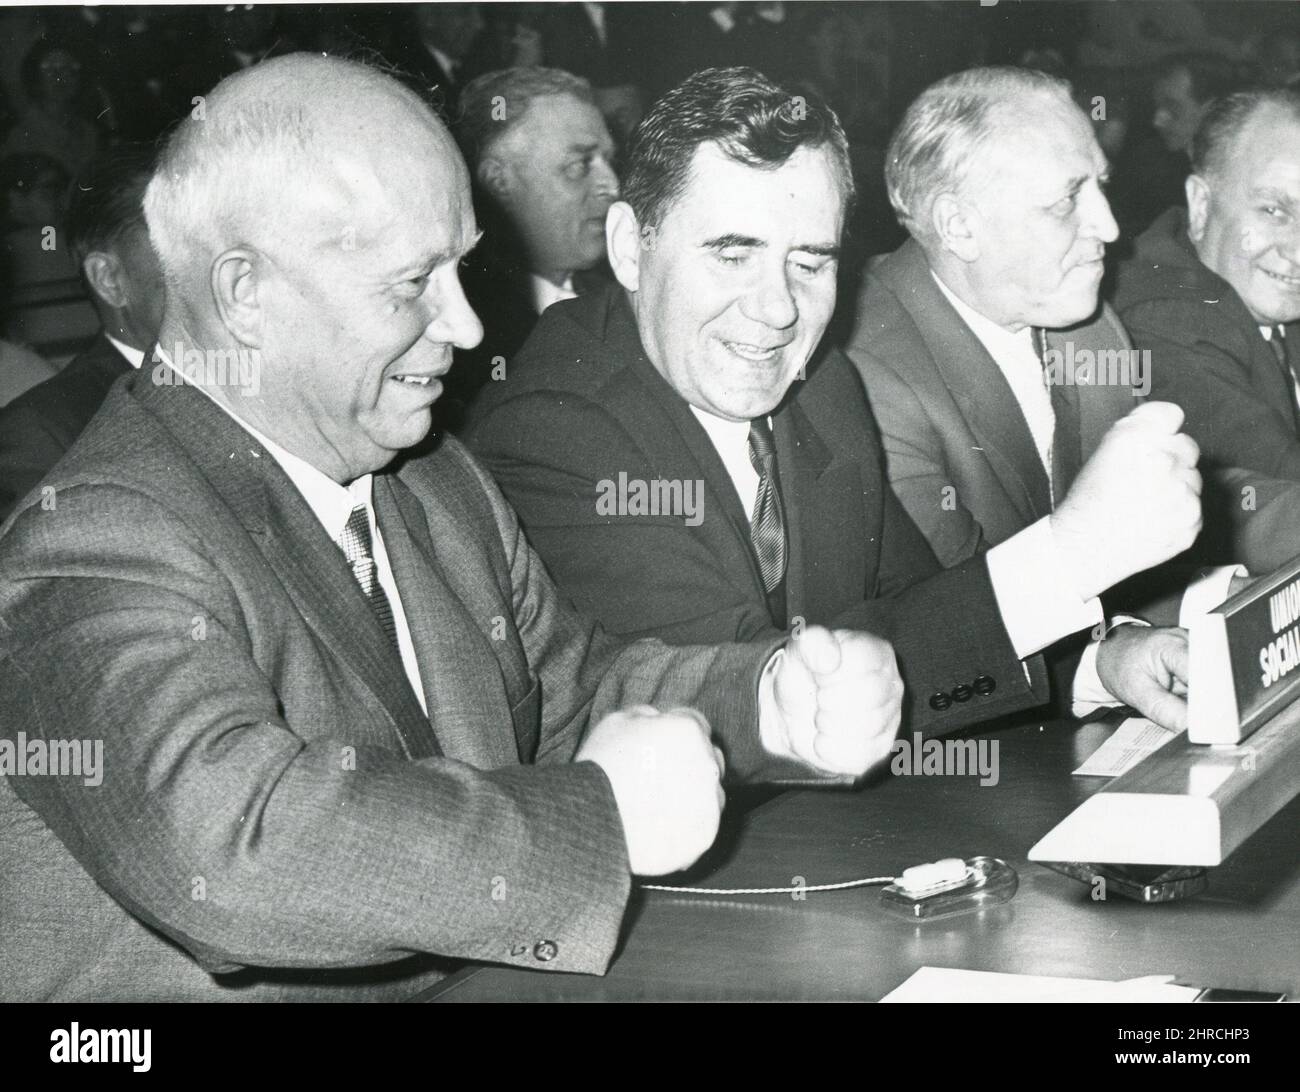 10-13-60 - New York - Soviet Premier Nikita Khrushchev and Soviet Foreign Minister, Andrei Gromyko (right) pound the table at the UN. The table-pounding occurred as most of the delegates to the 15th General Assembly applauded warmly for UN President Frederick Boland at the start of the session. Stock Photo